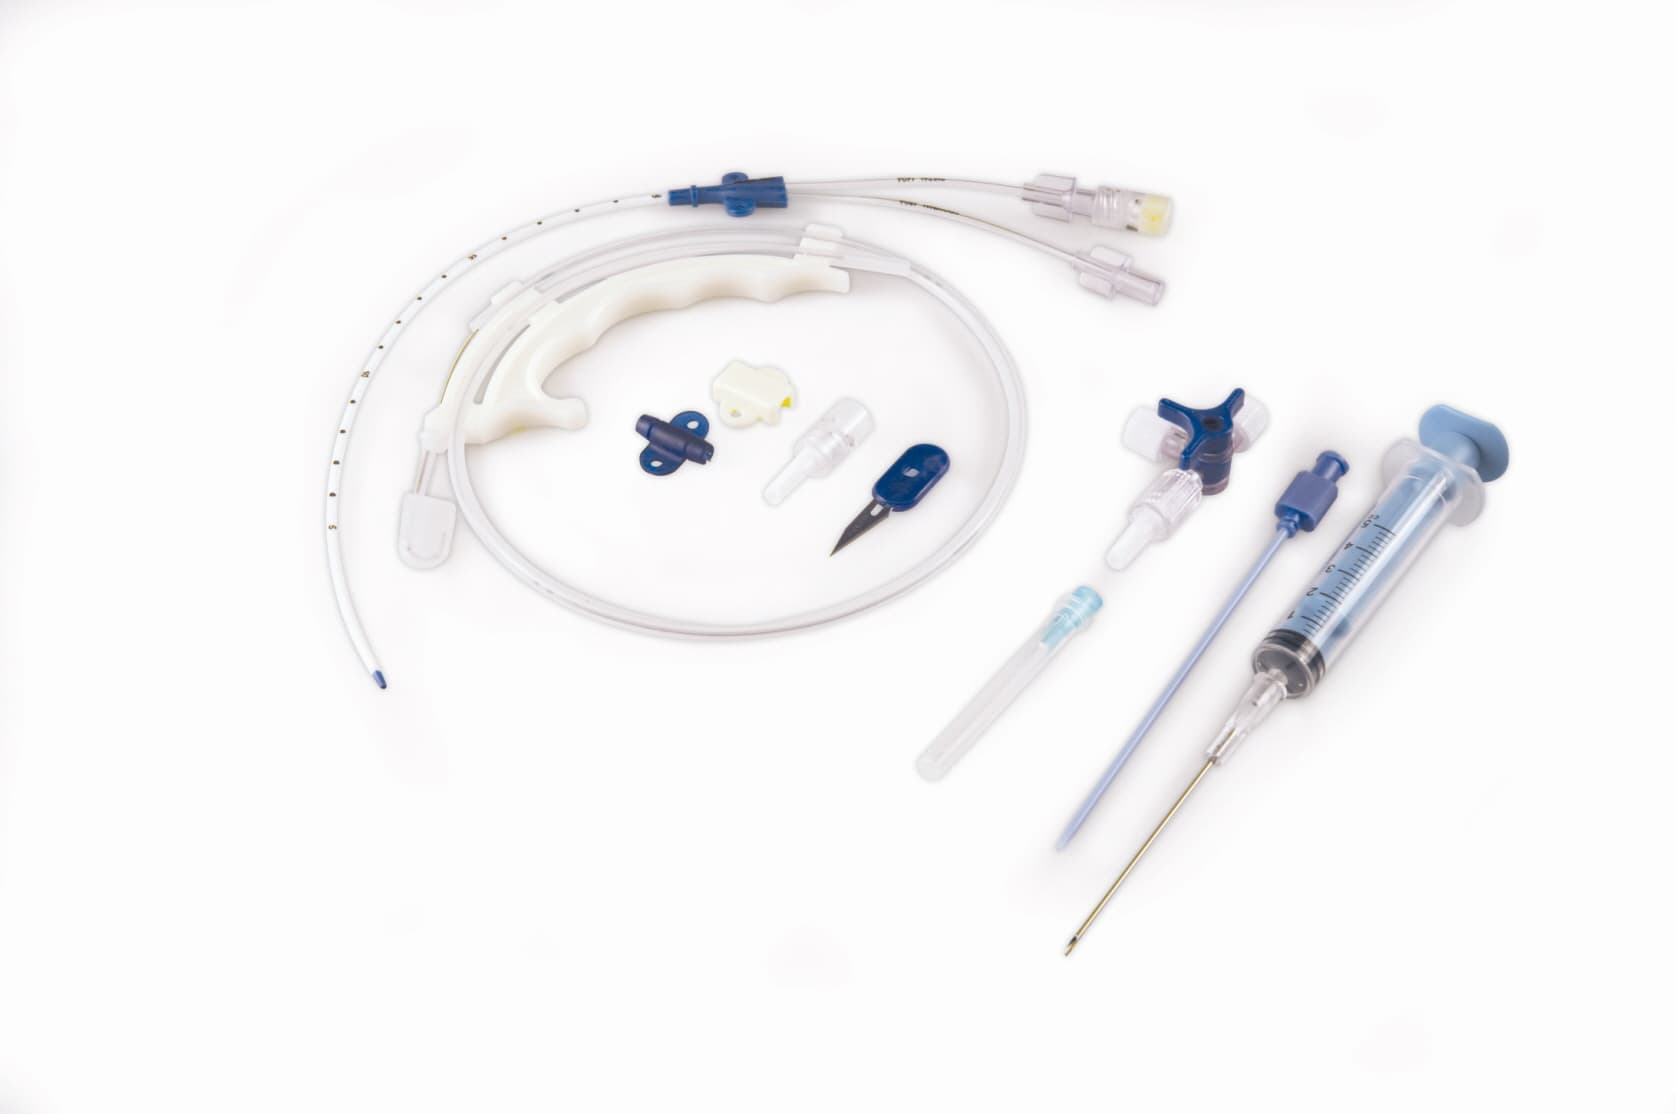 Central Venous Catheter Systems